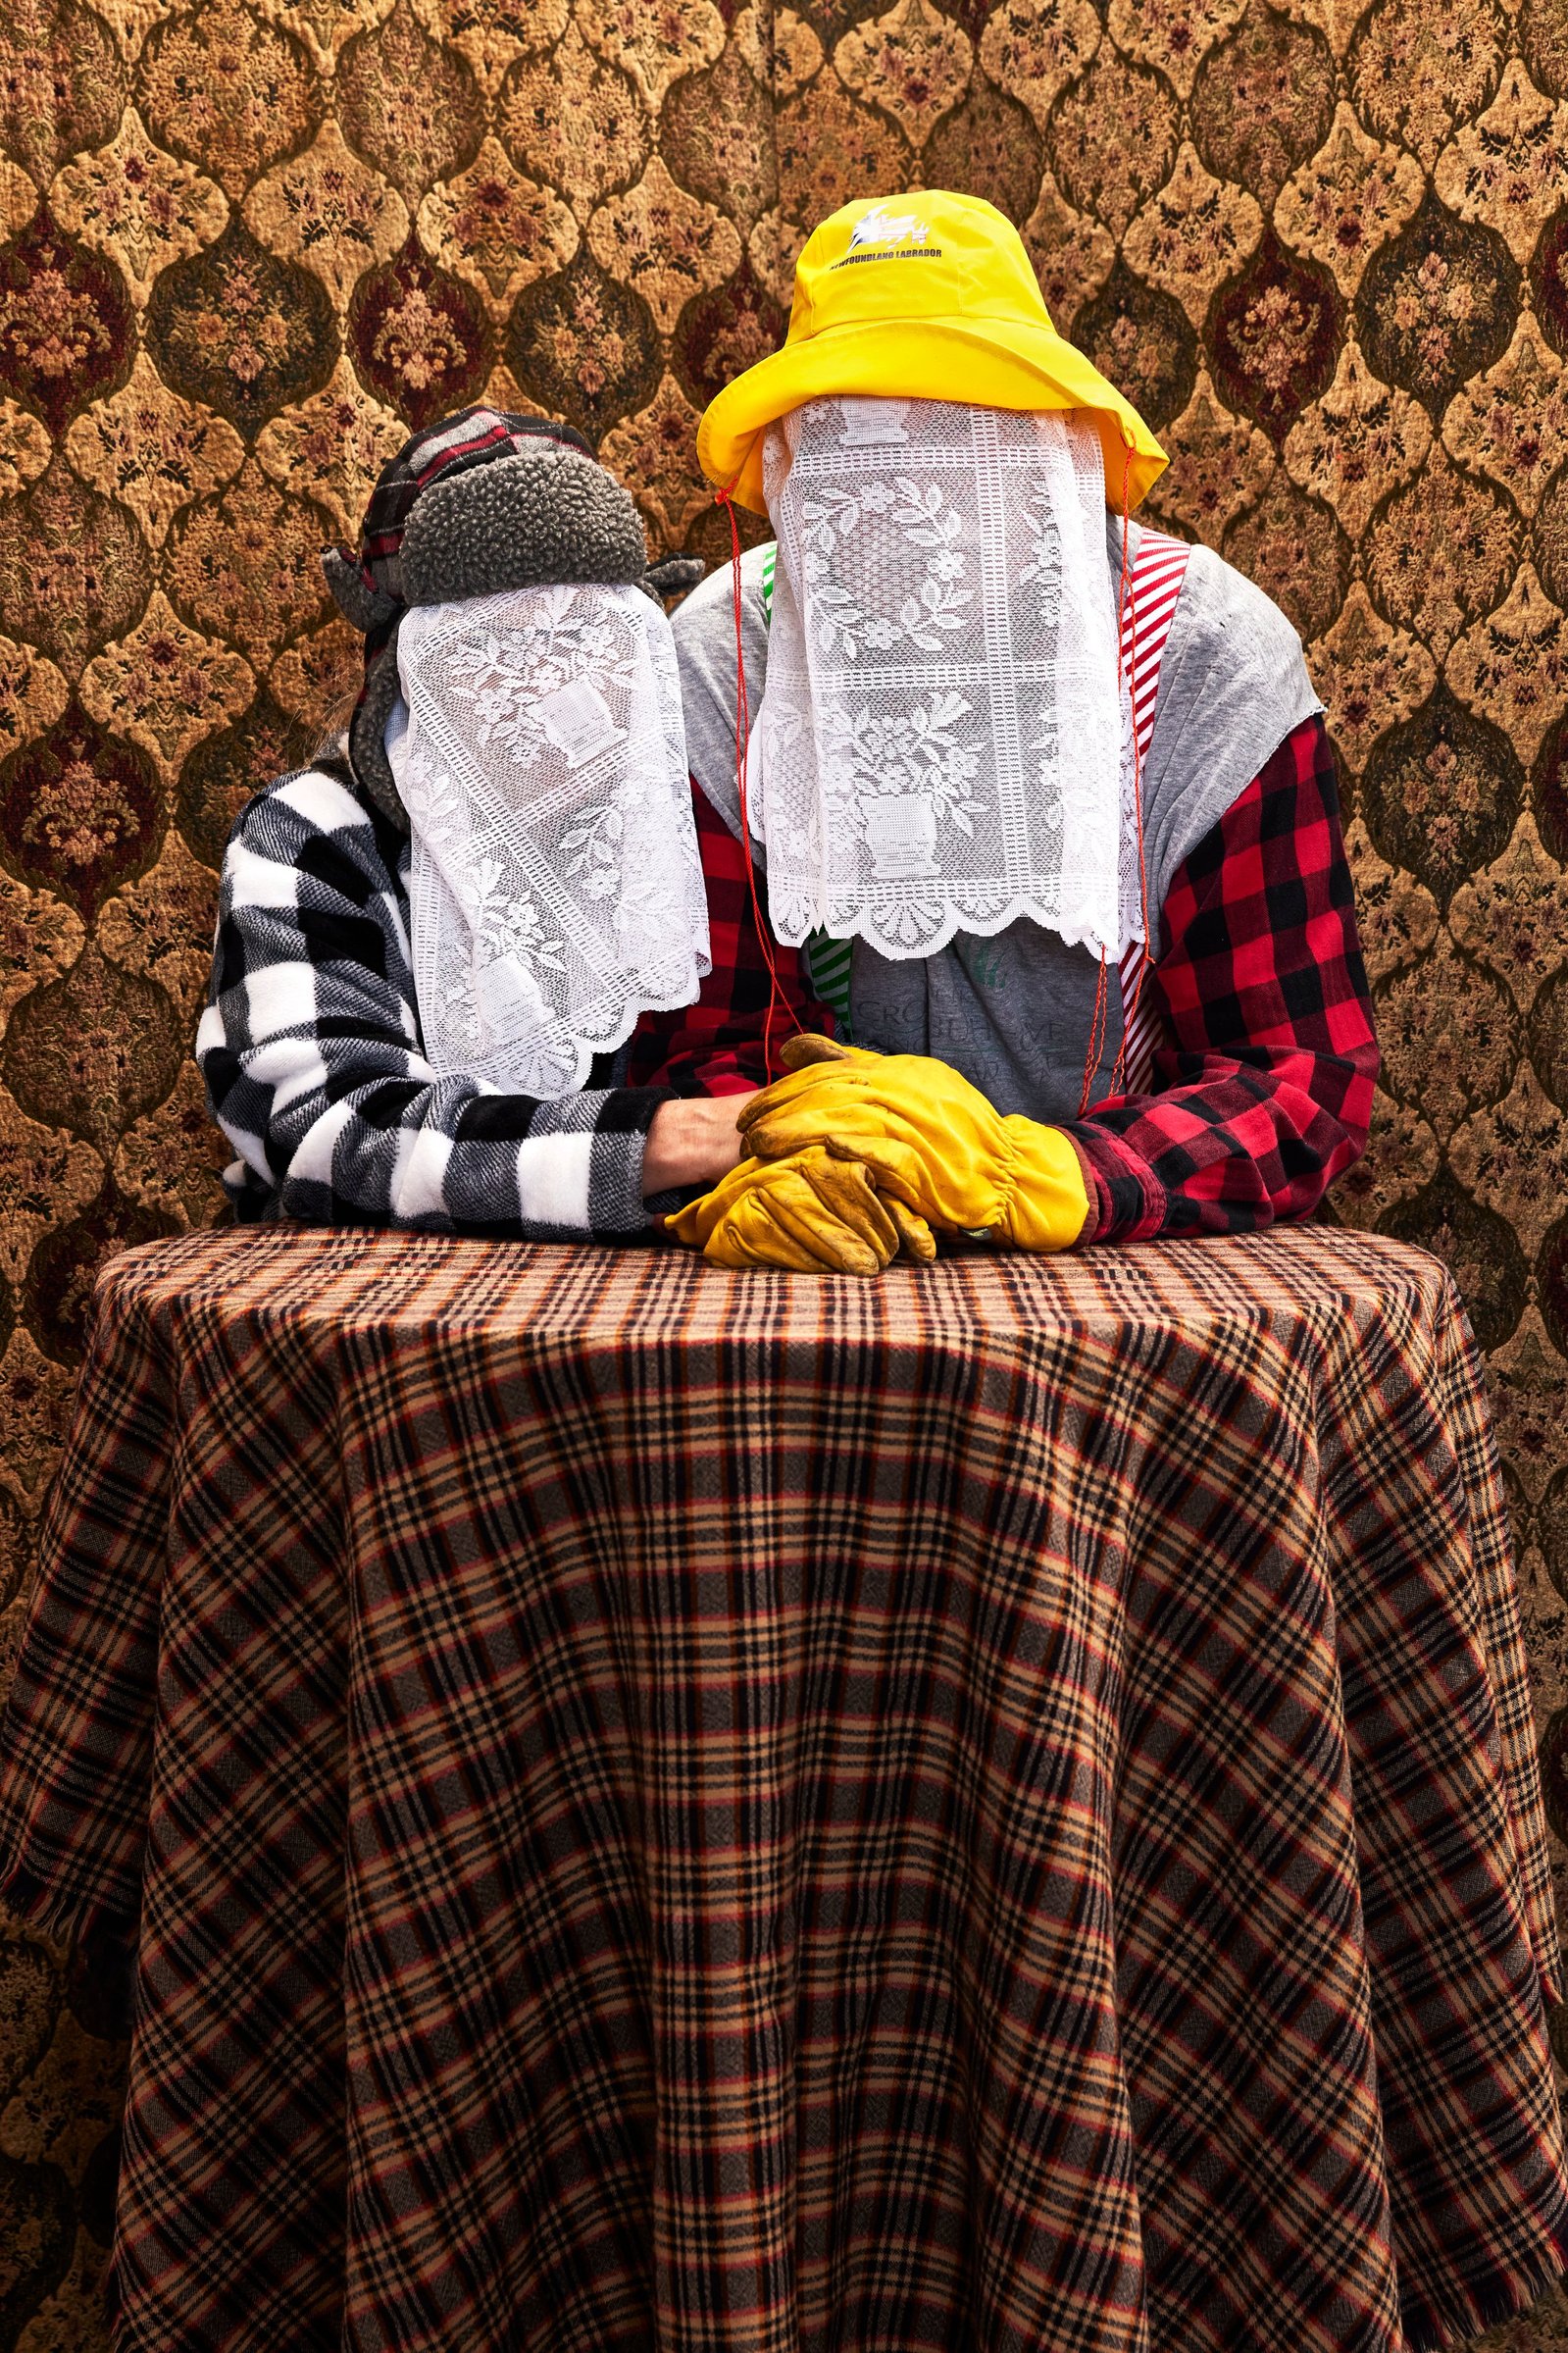 Portrait of a mummer in St John's, Newfoundland. Sue & Paul Dynes was photographed by Adam Coish Photography in 2022.